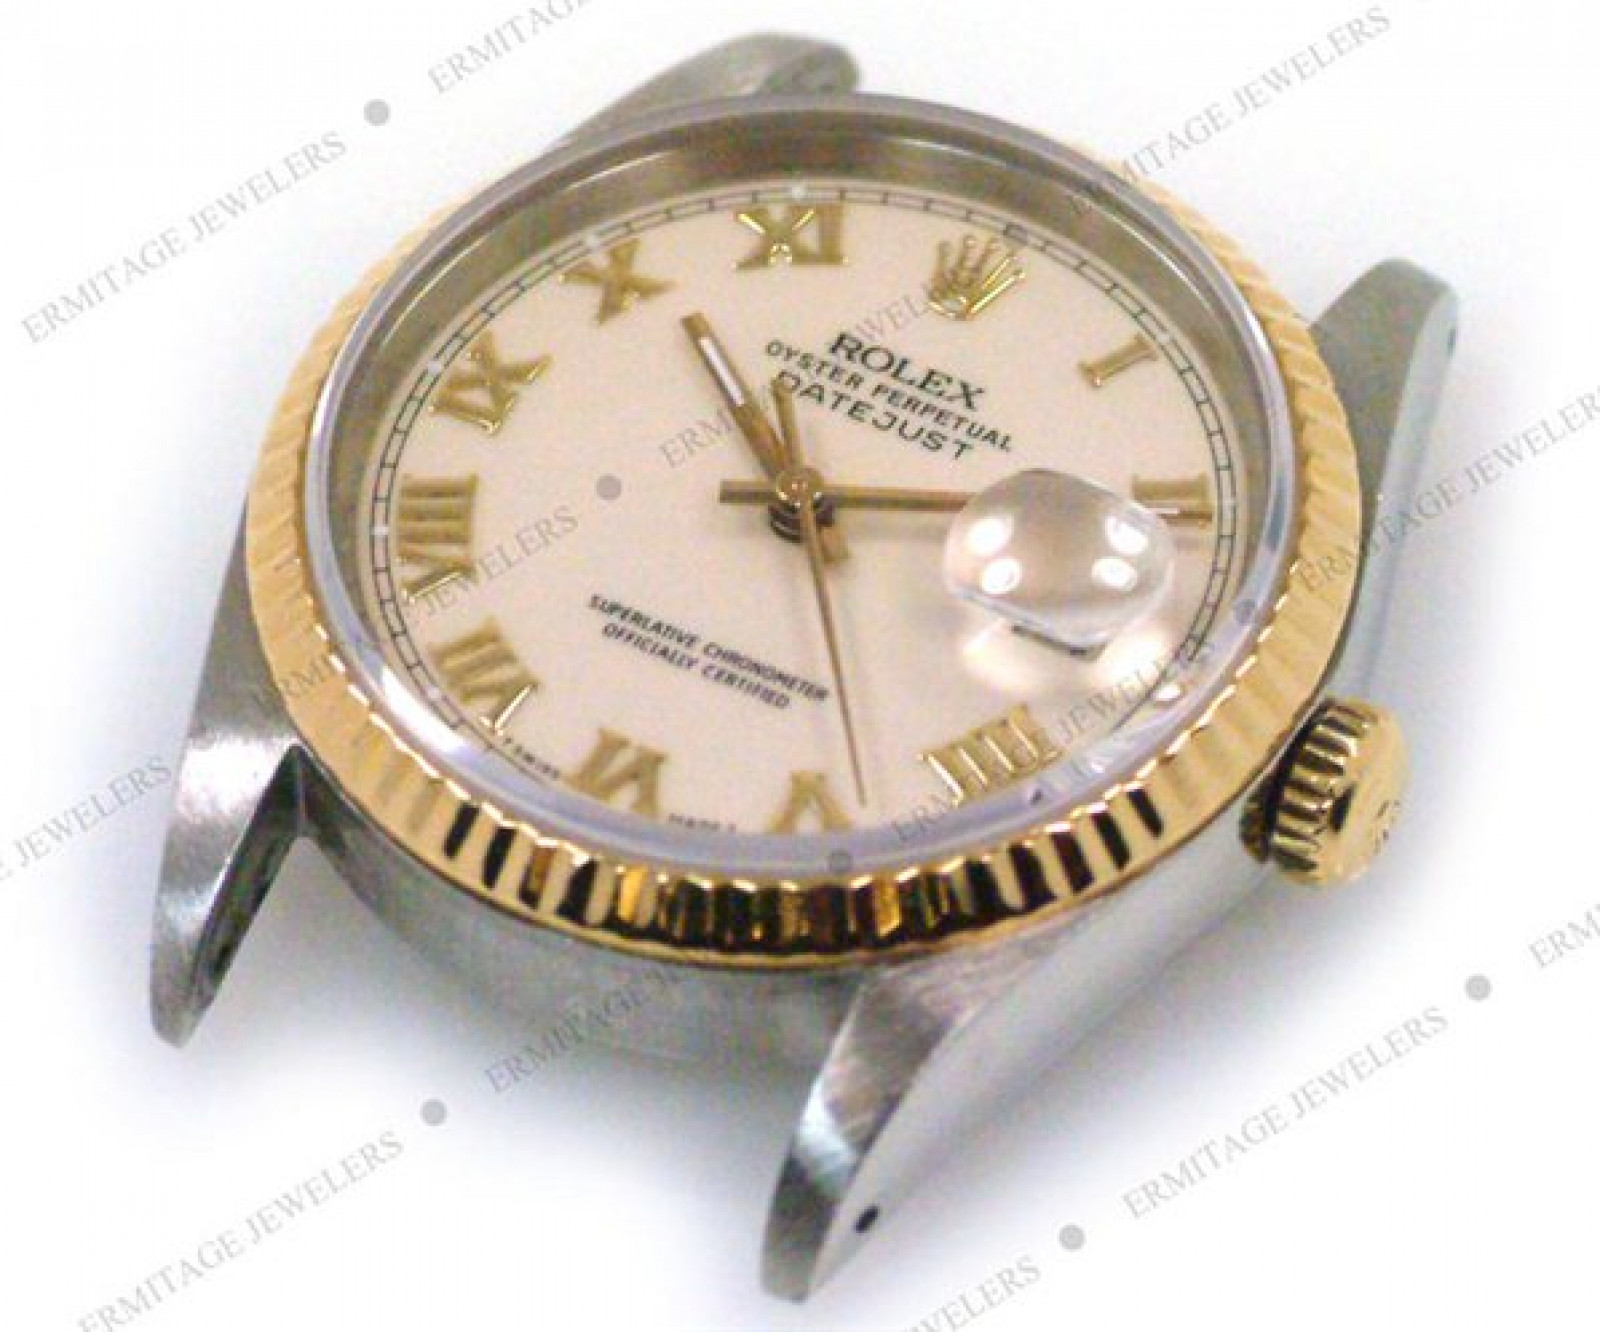 Rolex Datejust 16233 Used Authentic Watch